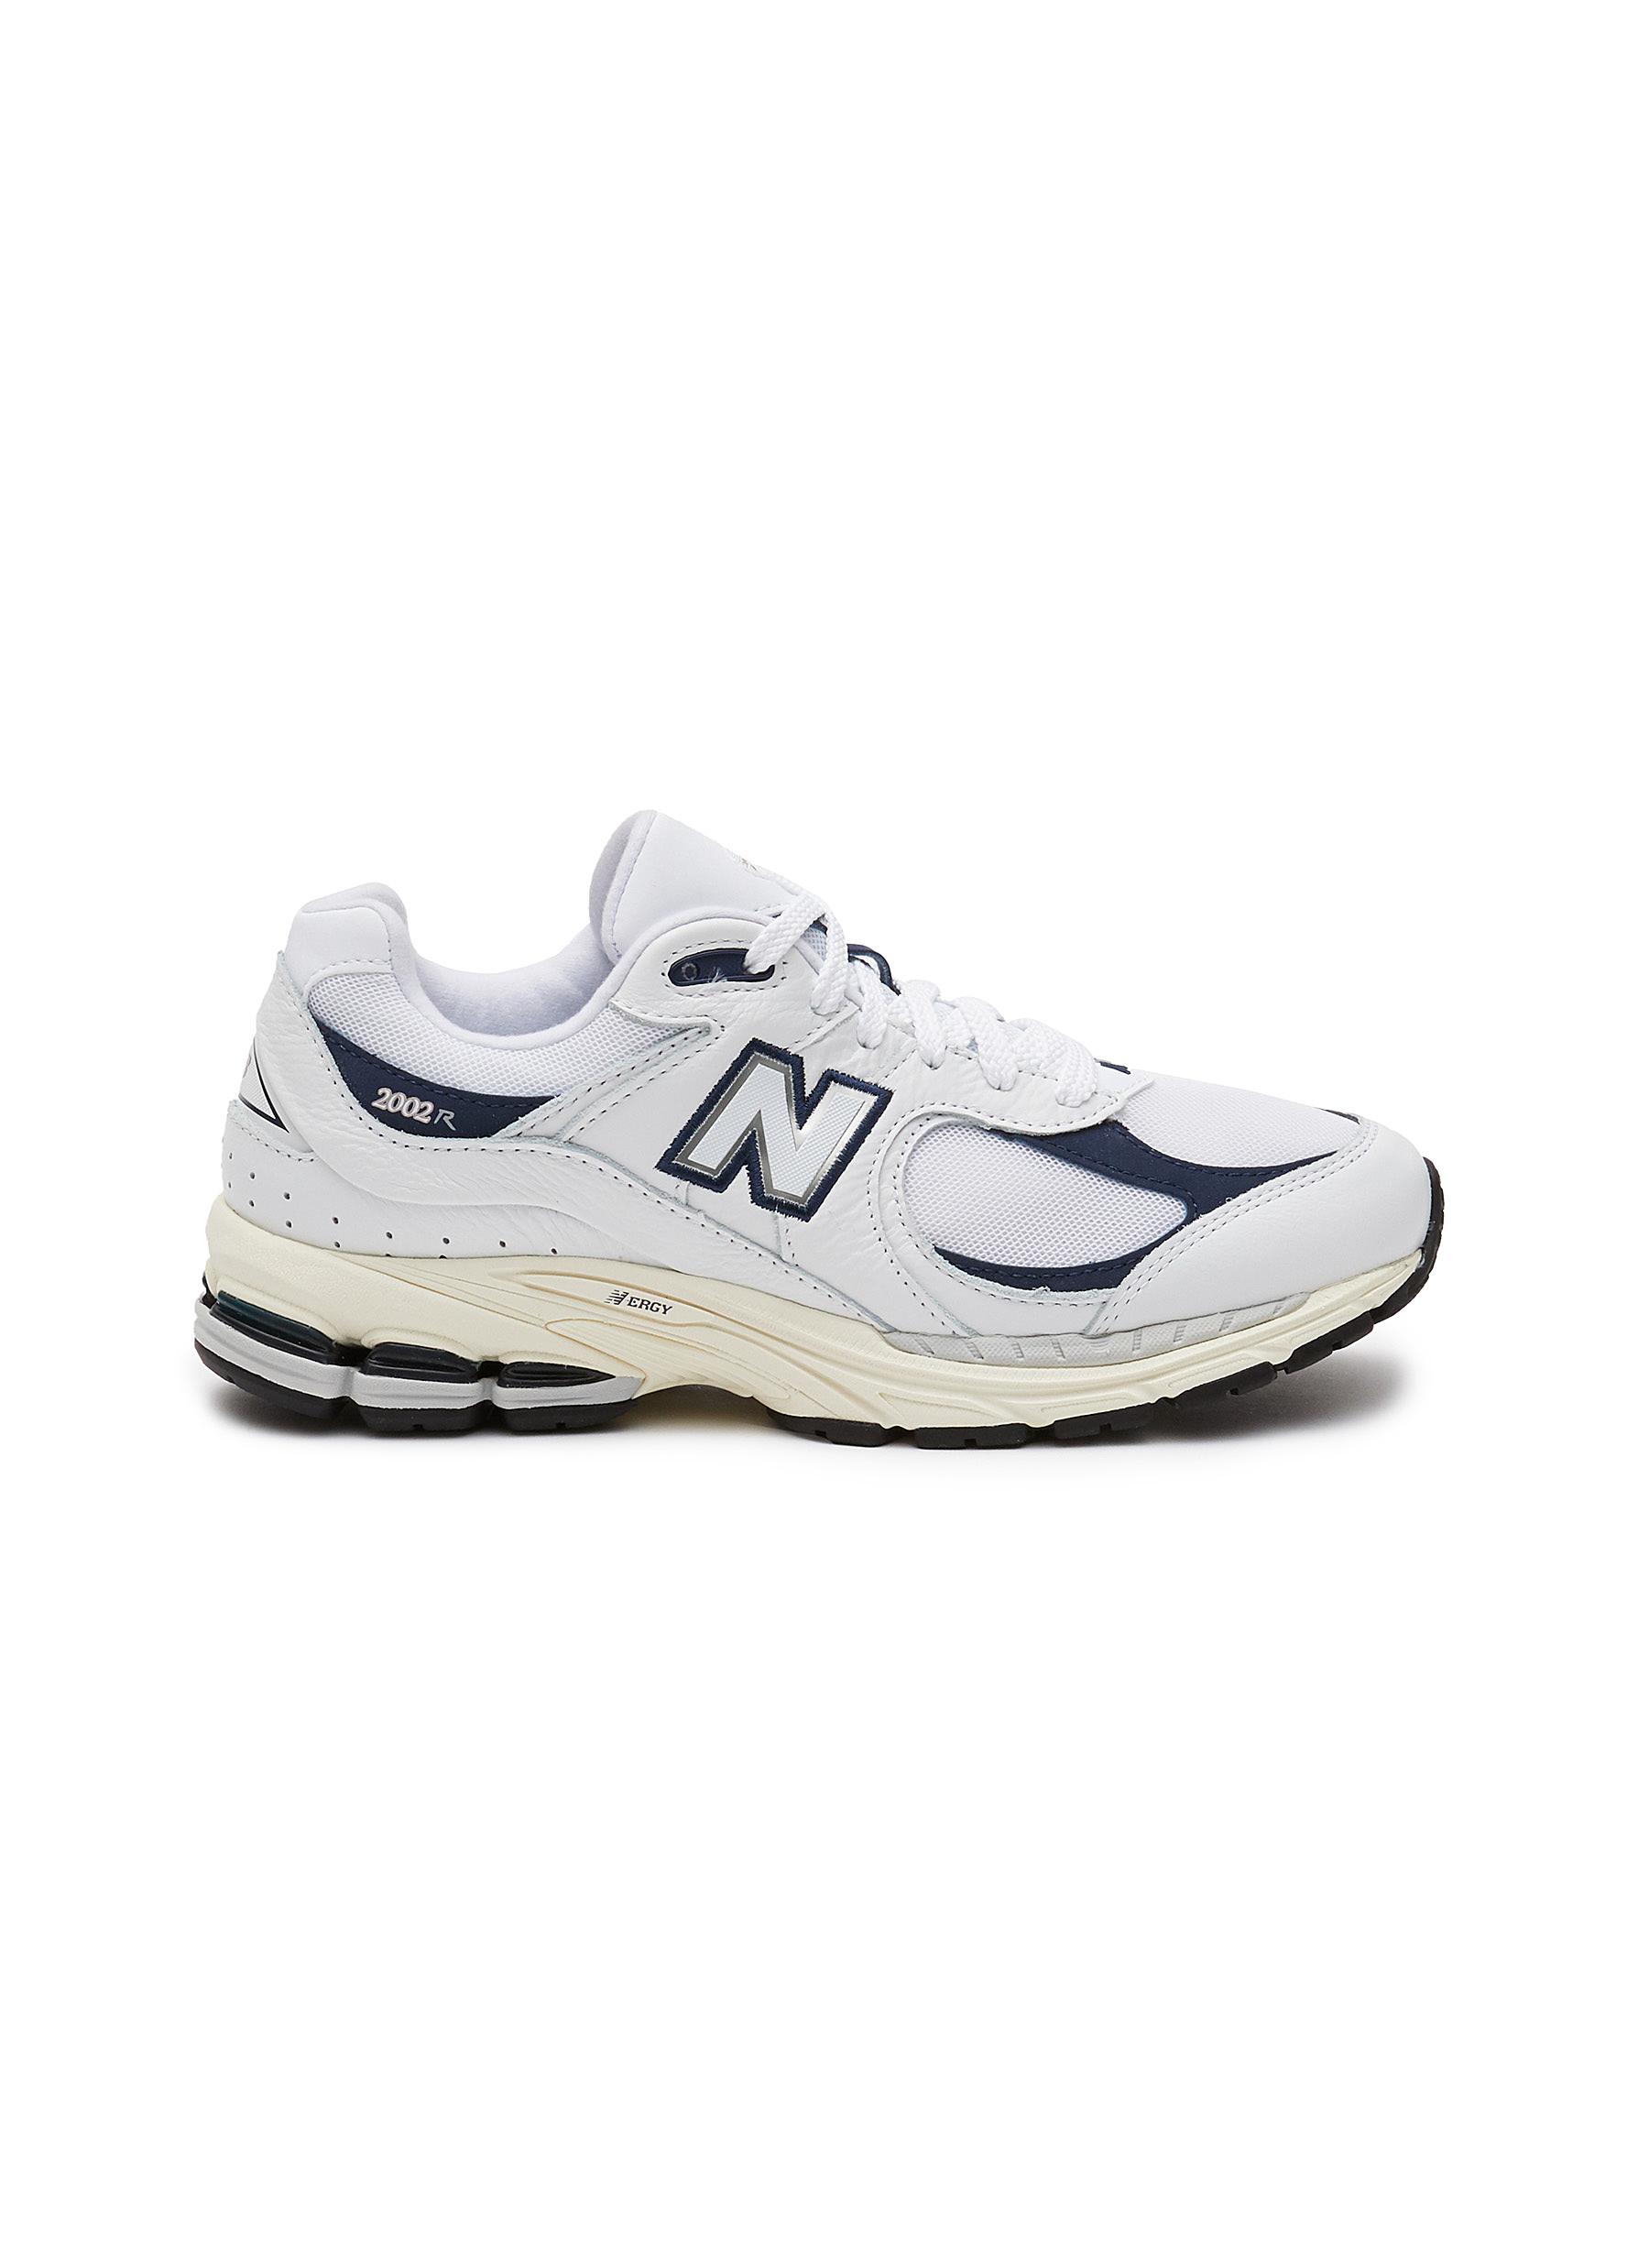 NEW BALANCE | '2002' LOW TOP LACE UP SNEAKERS | Women | Lane Crawford